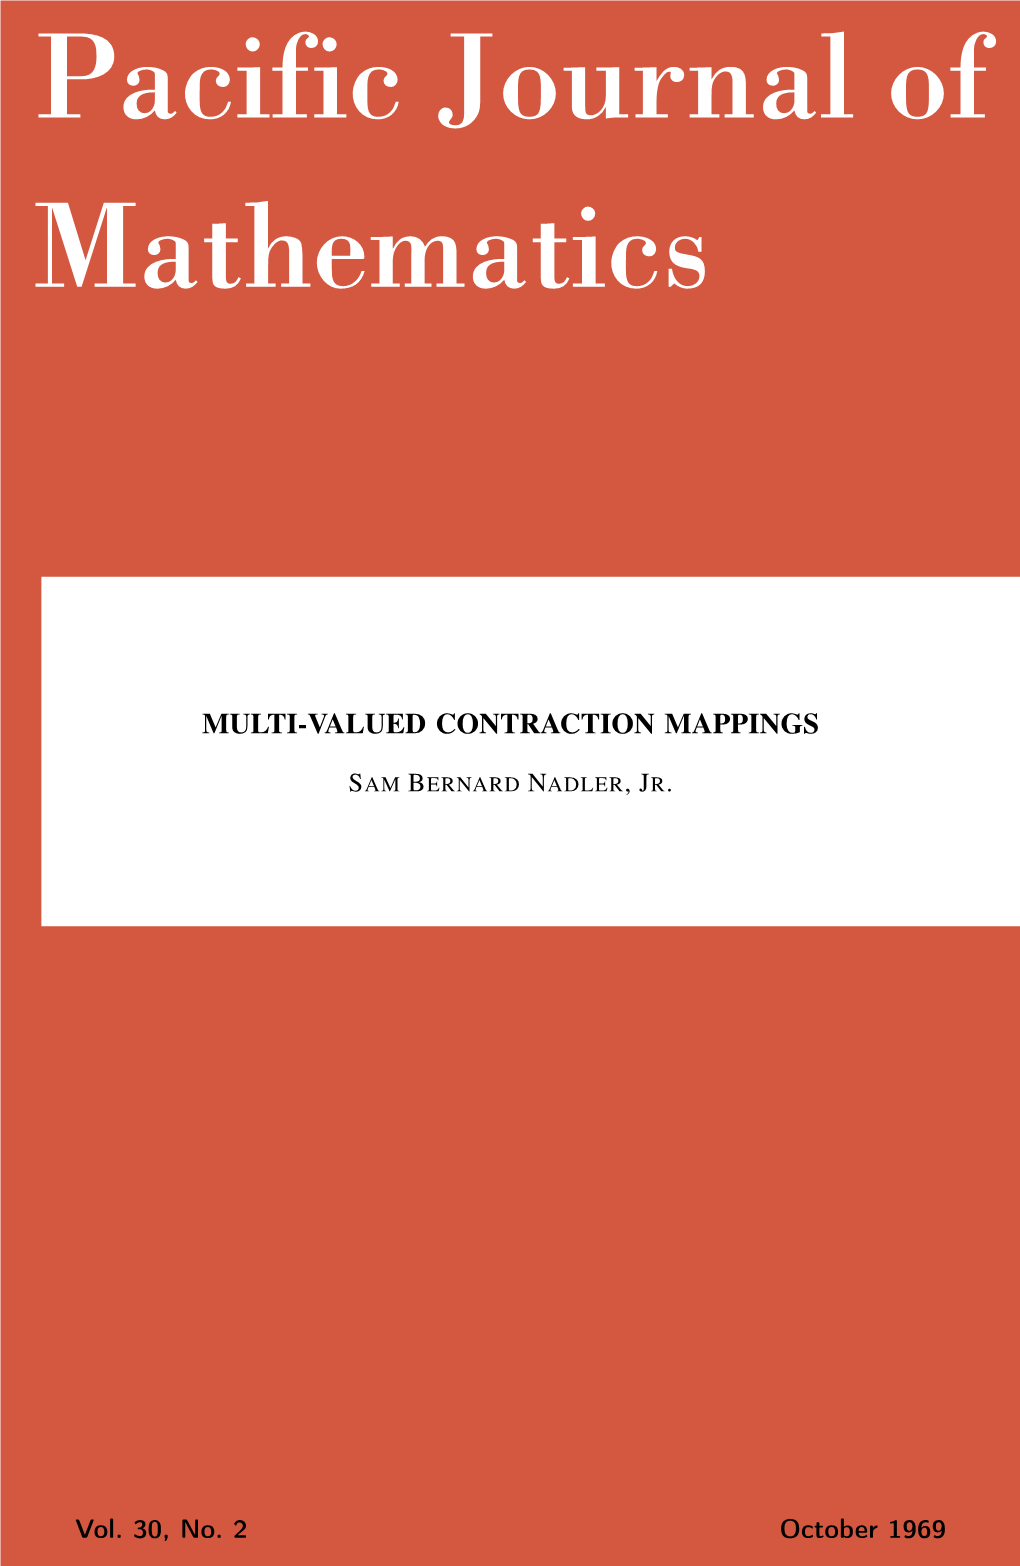 Multi-Valued Contraction Mappings